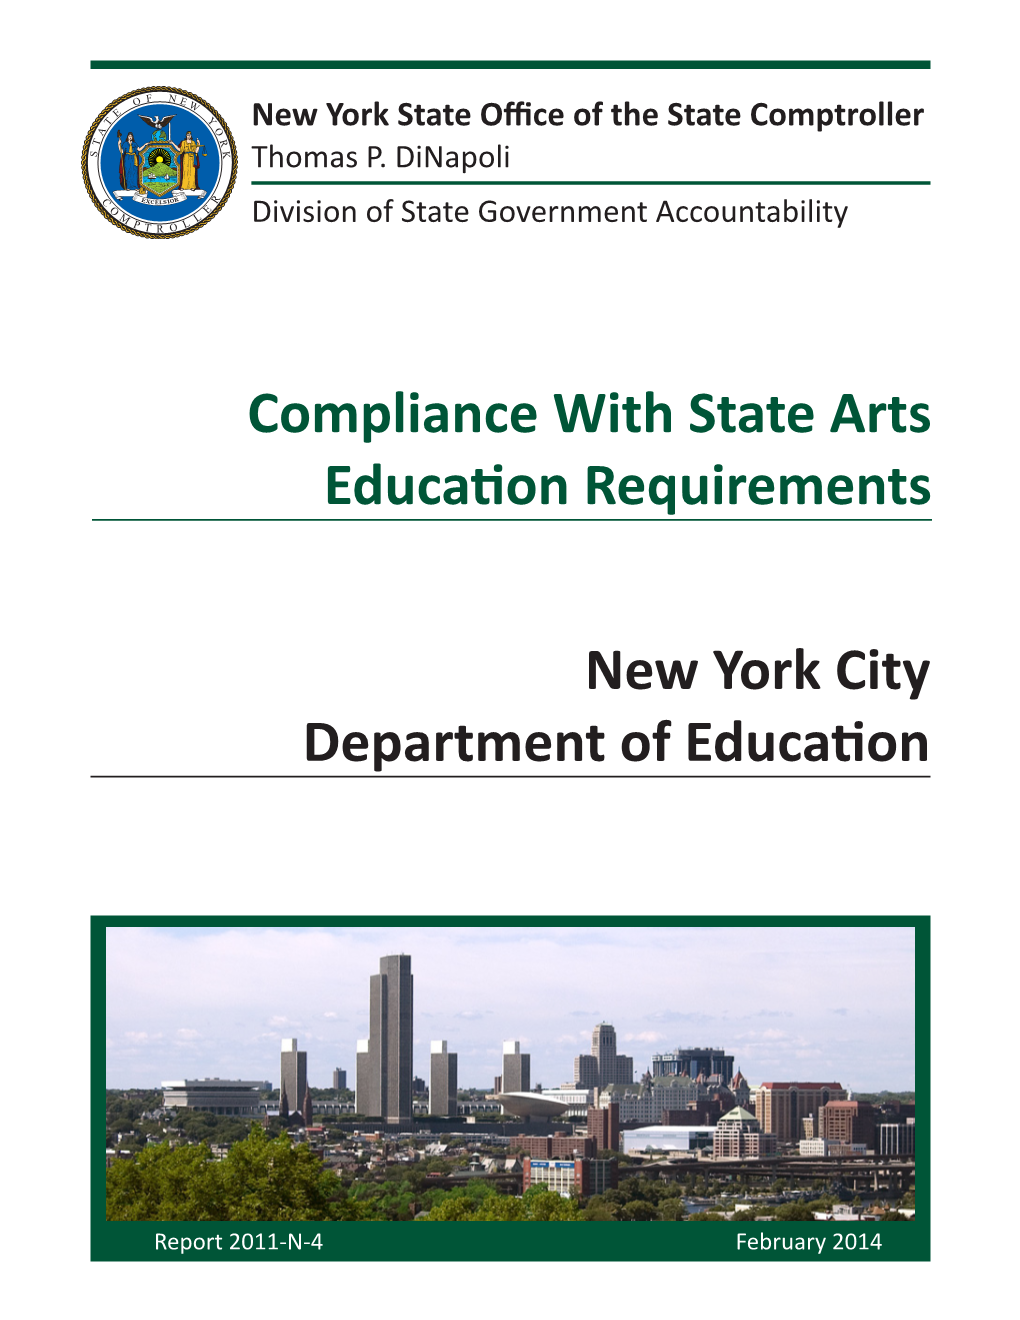 Compliance with State Arts Education Requirements